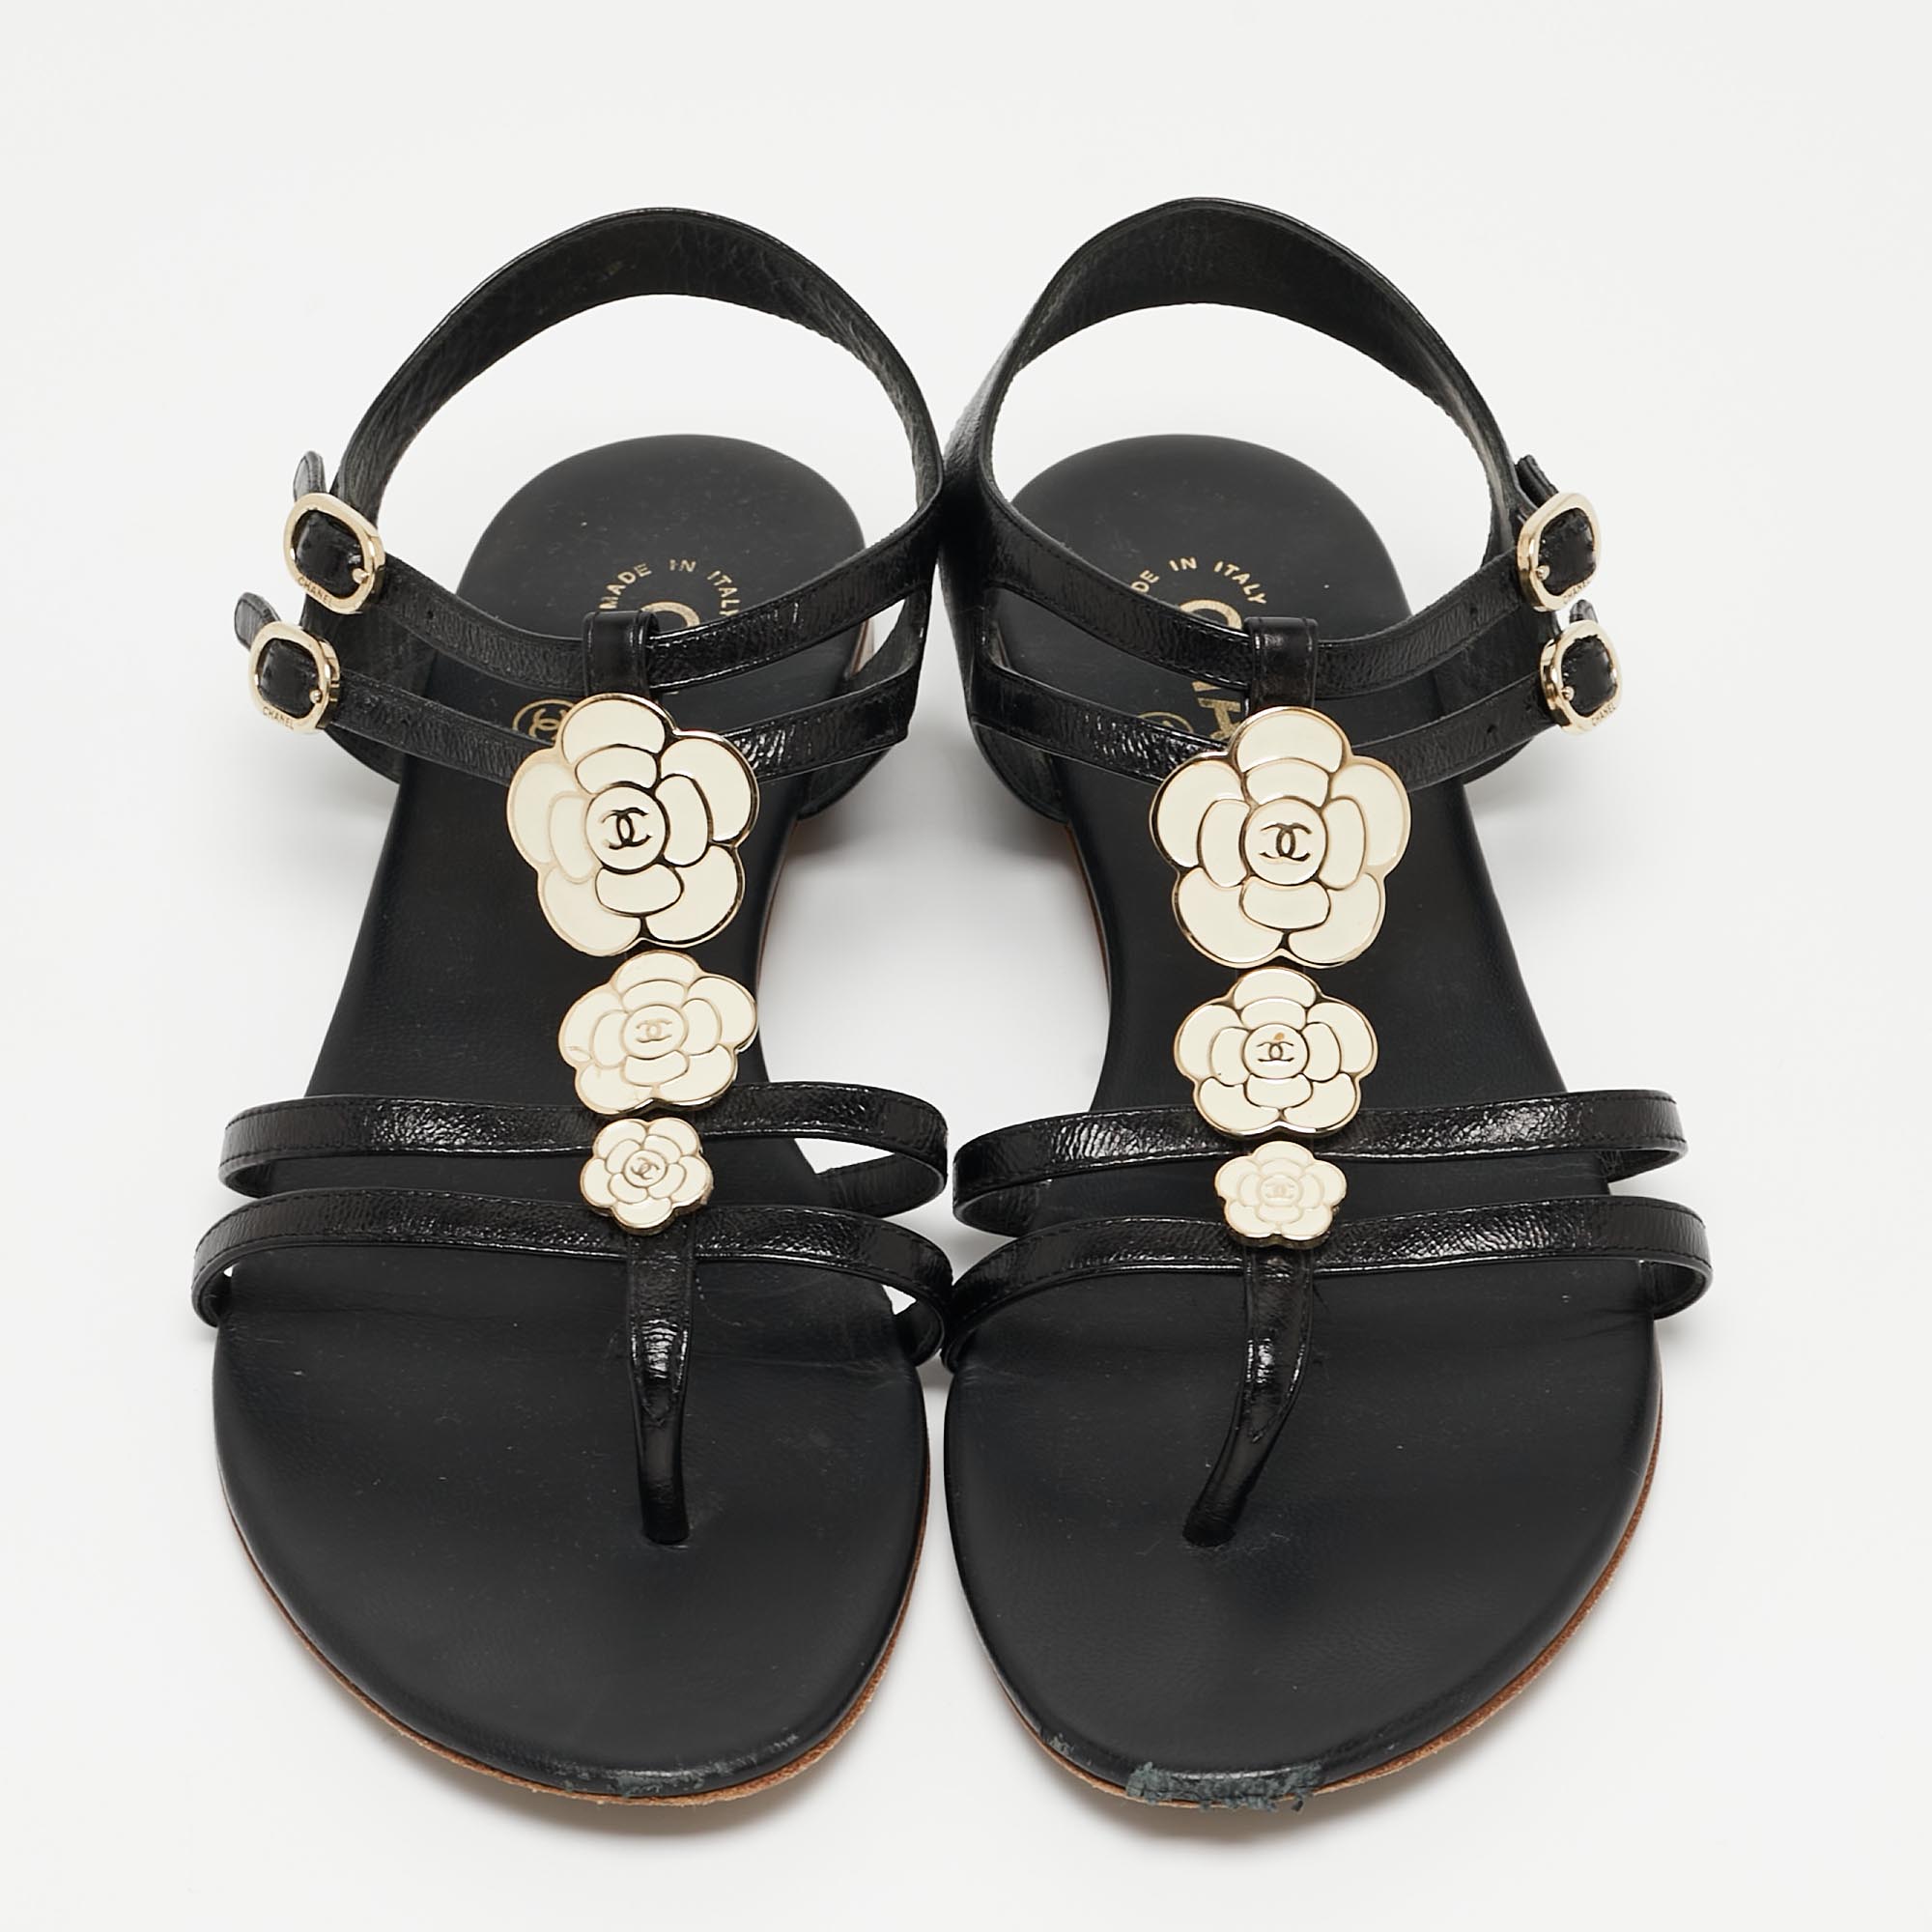 Chanel Black Leather CC Camellia Thong Flat Sandals Size 37.5